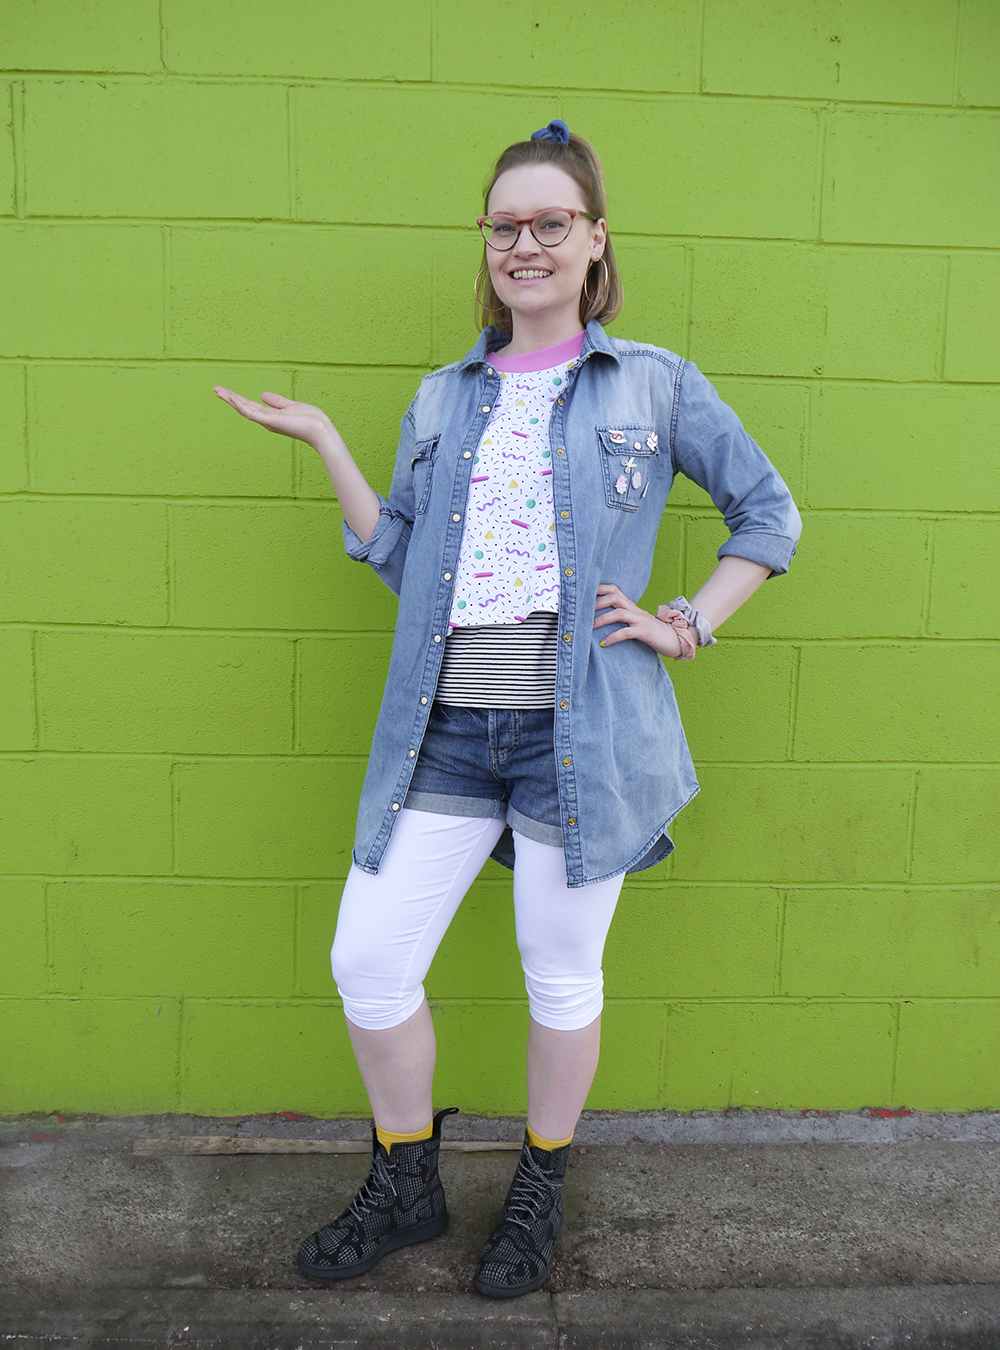 90's Nickelodeon Clarissa Explains It All as worn by Wardrobe Conversations blog